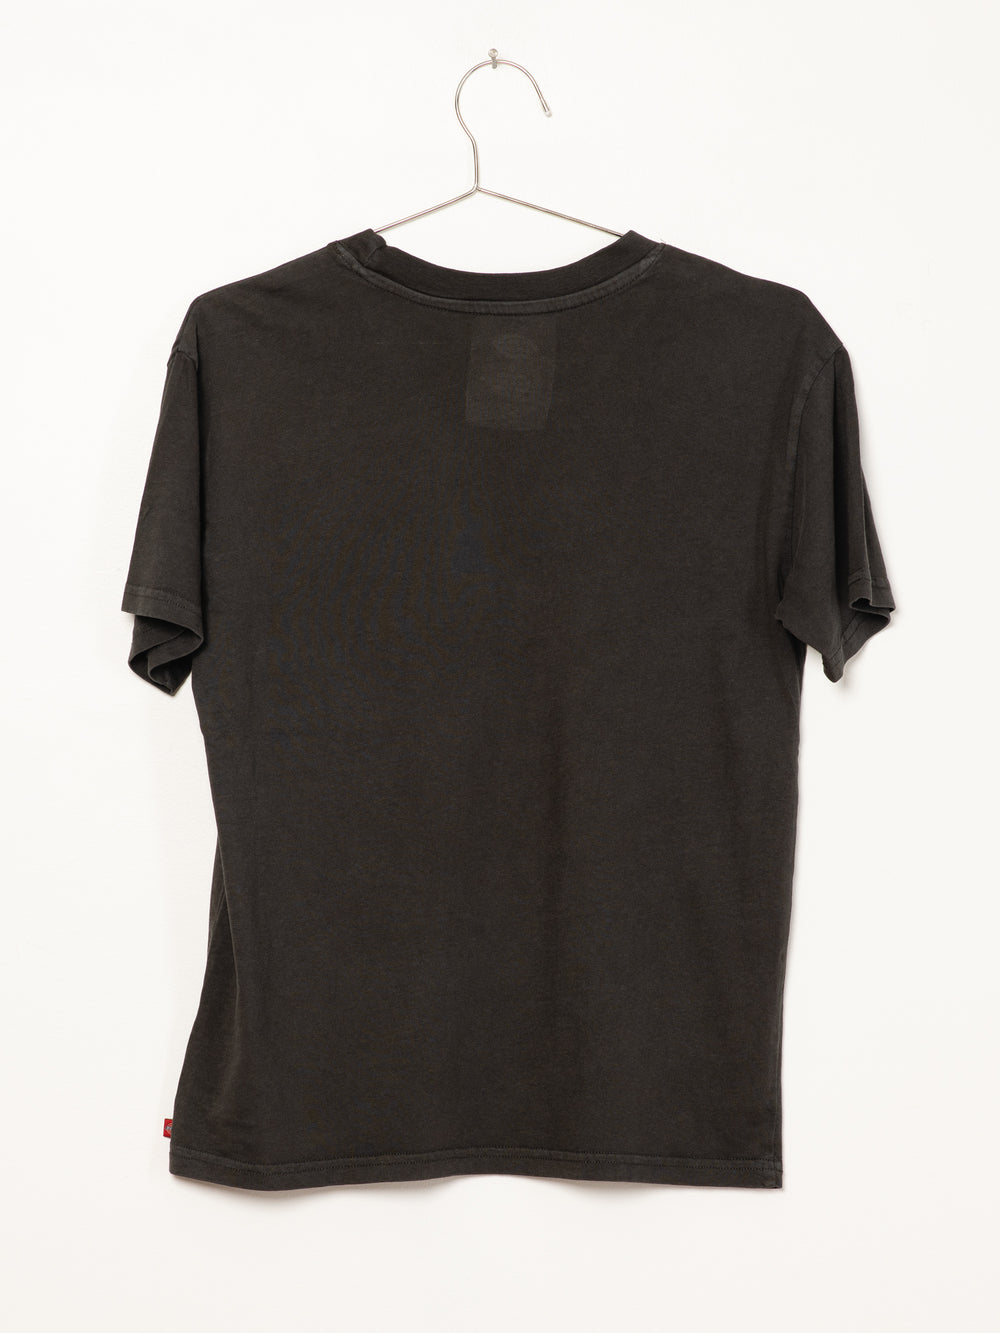 DICKIES QUITAR SCREEN OVER SIZED SHORT SLEEVE T-SHIRT  - CLEARANCE